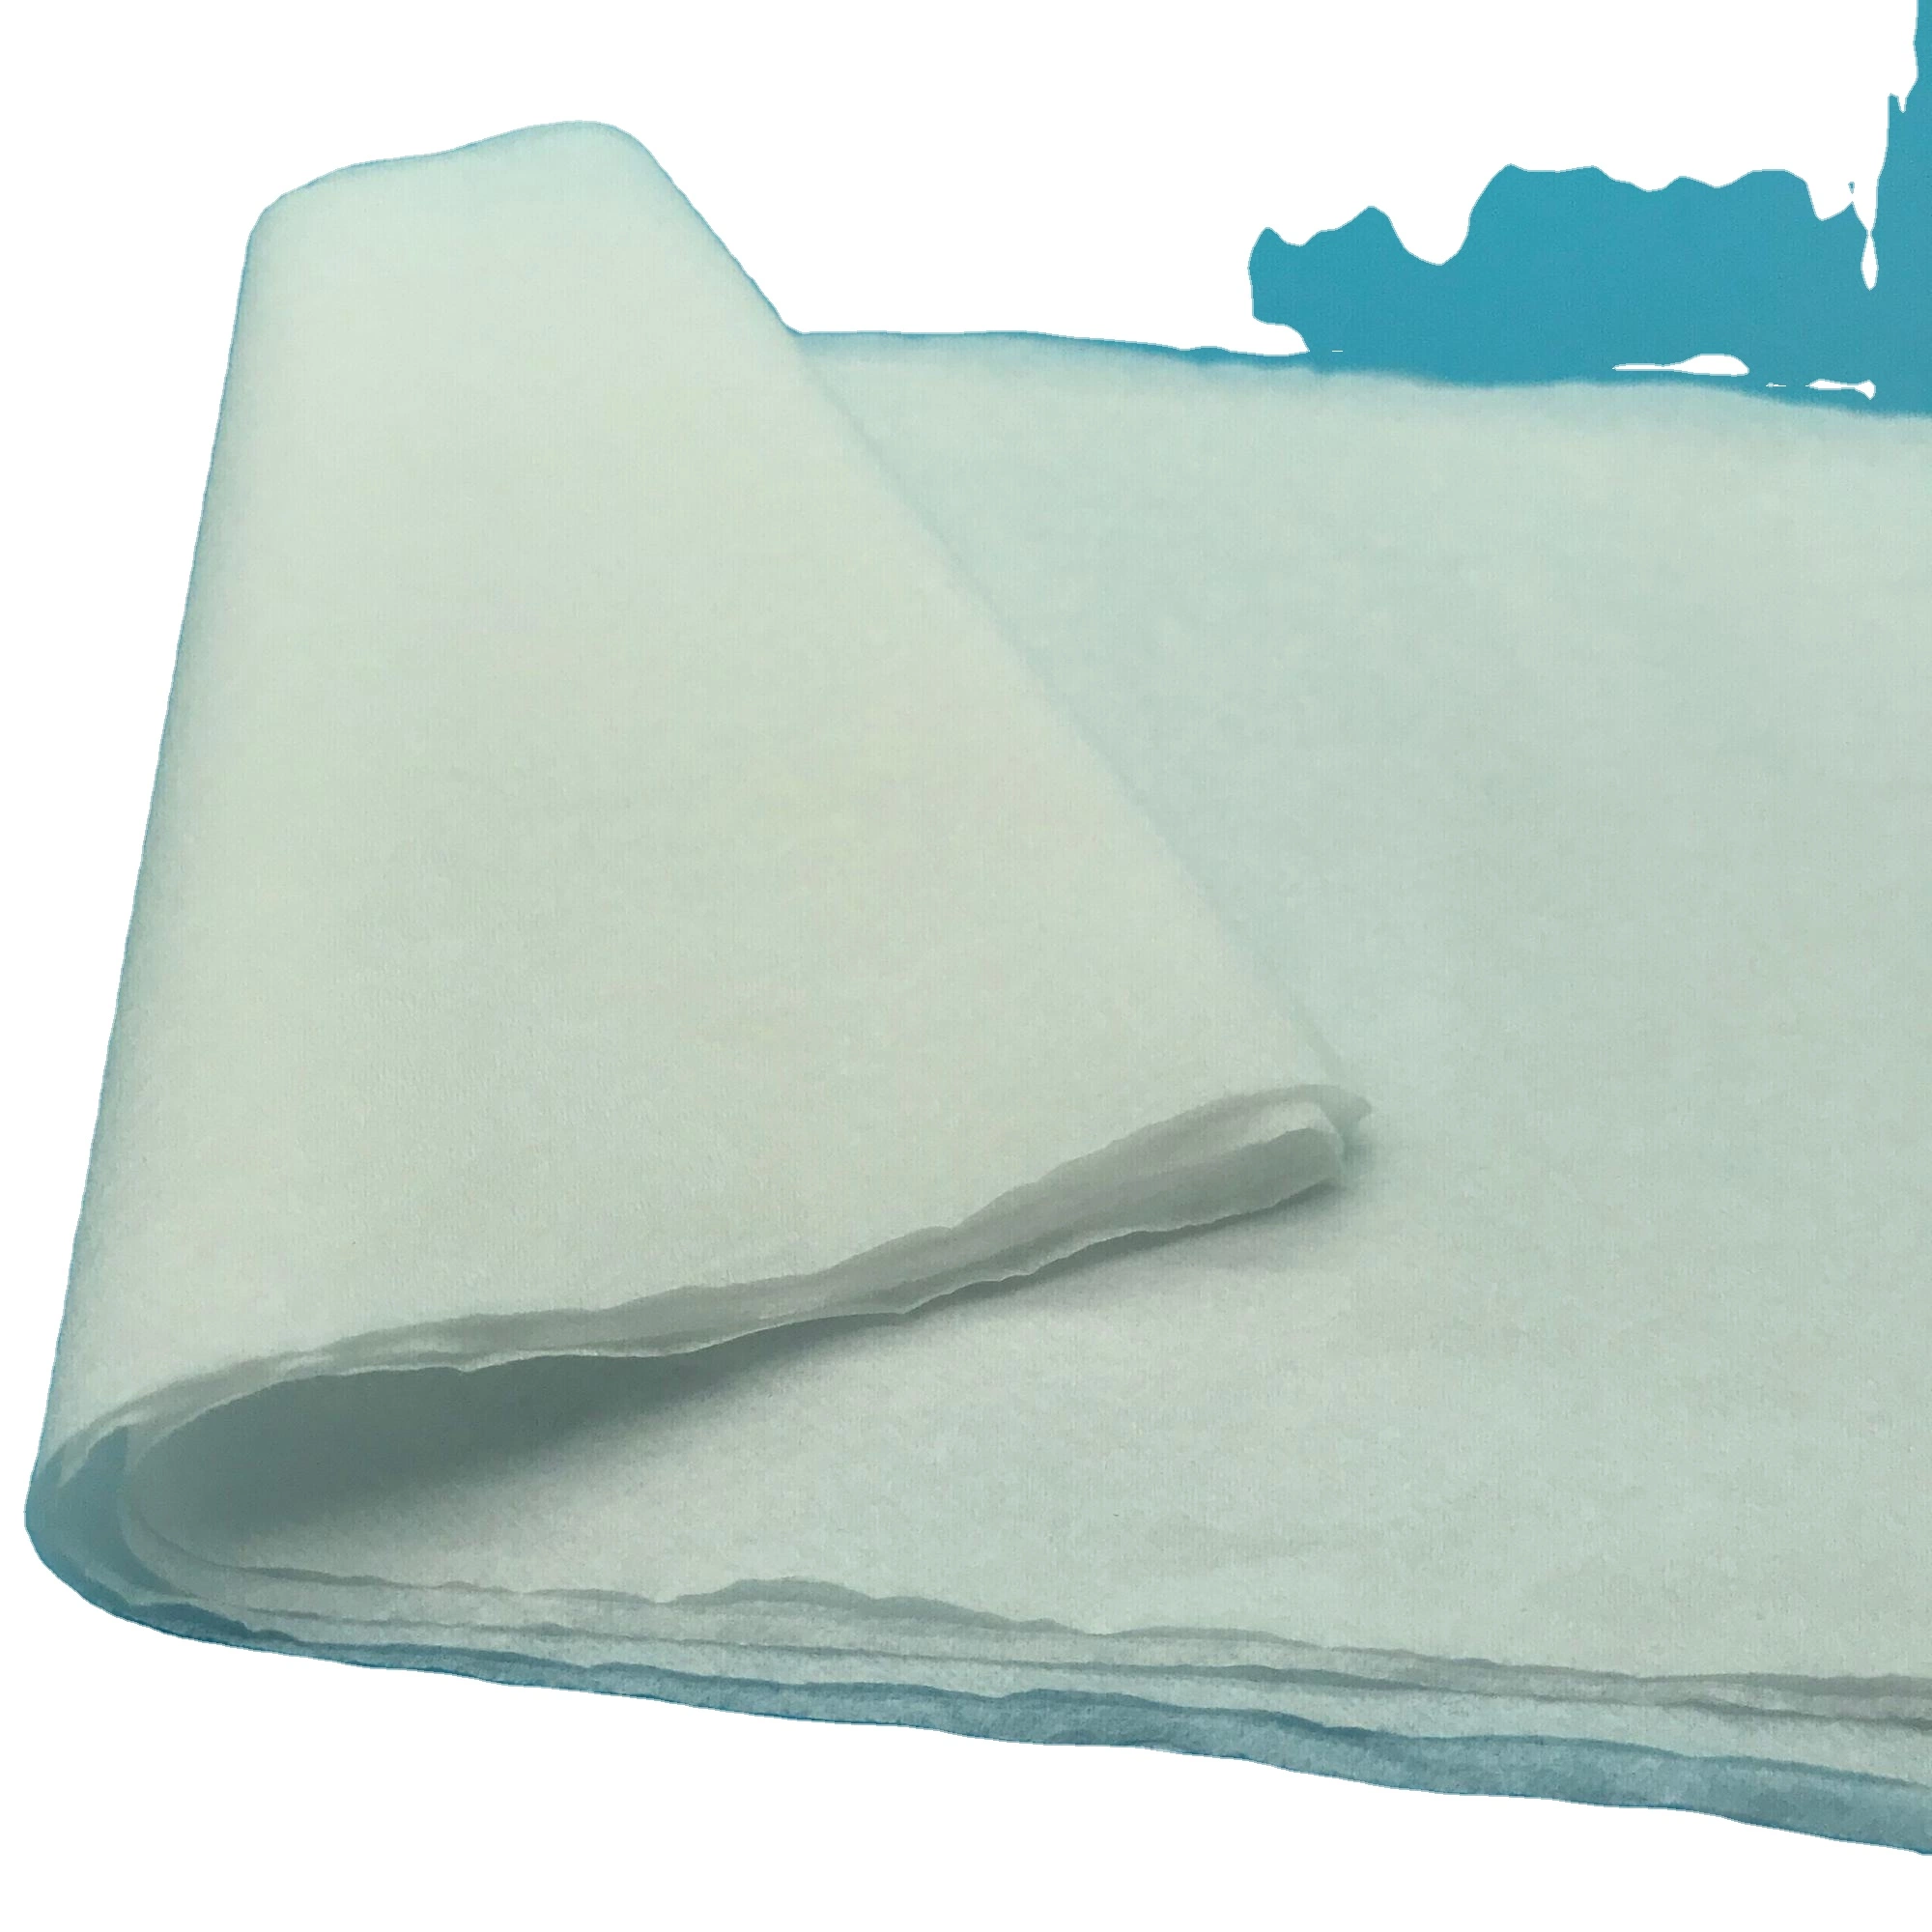 Juhuachuang Raw Material Super Thin Absorbent Airlaid Paper with Sap for Sanitary Napkin/Diaper